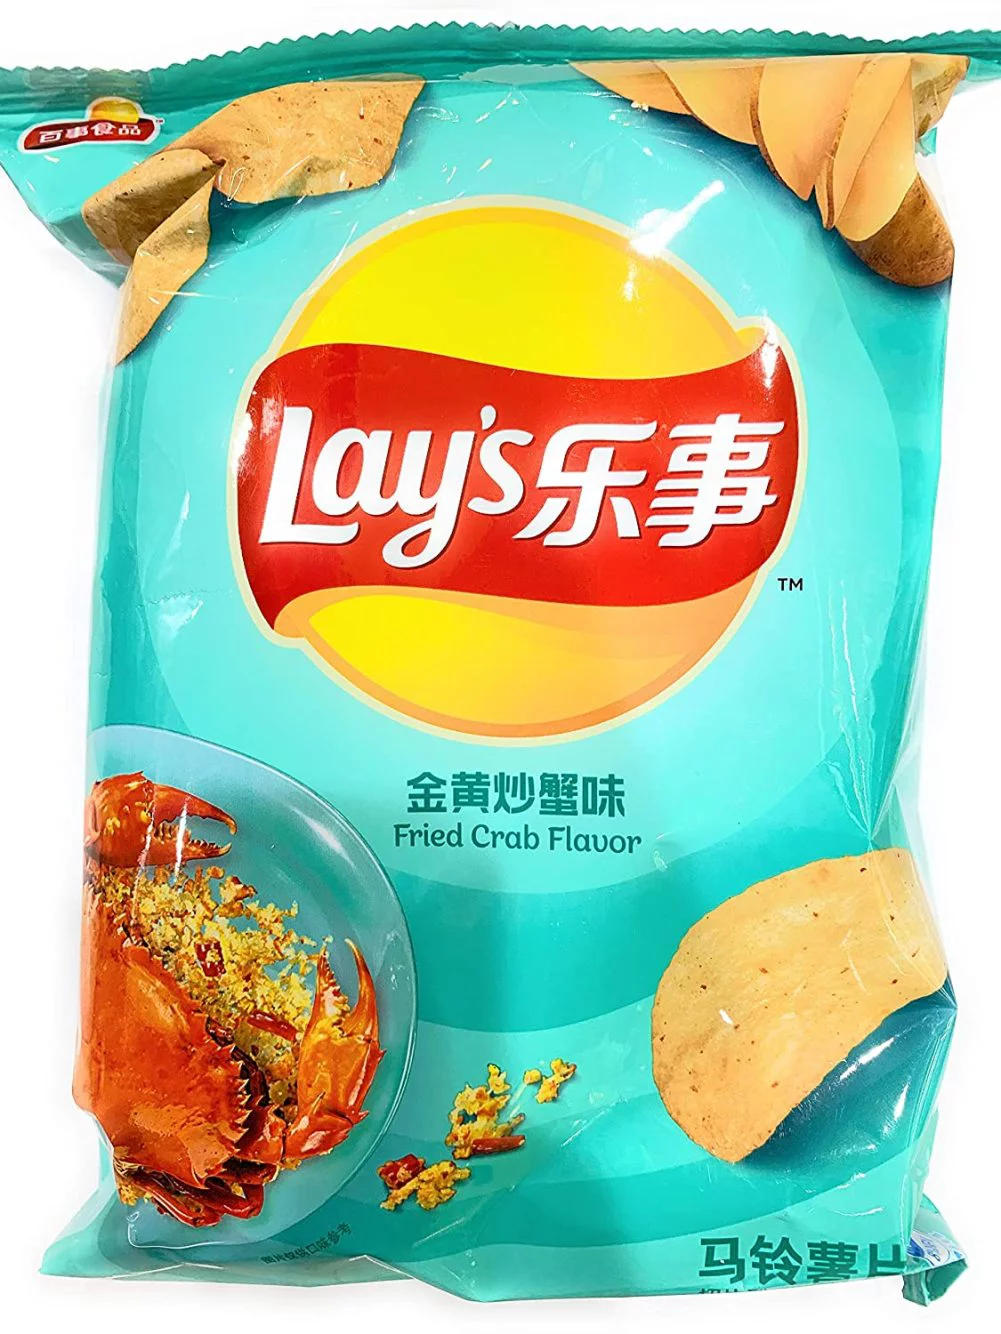 A light blue bag of Lay's chips with an illustration of a crab dish